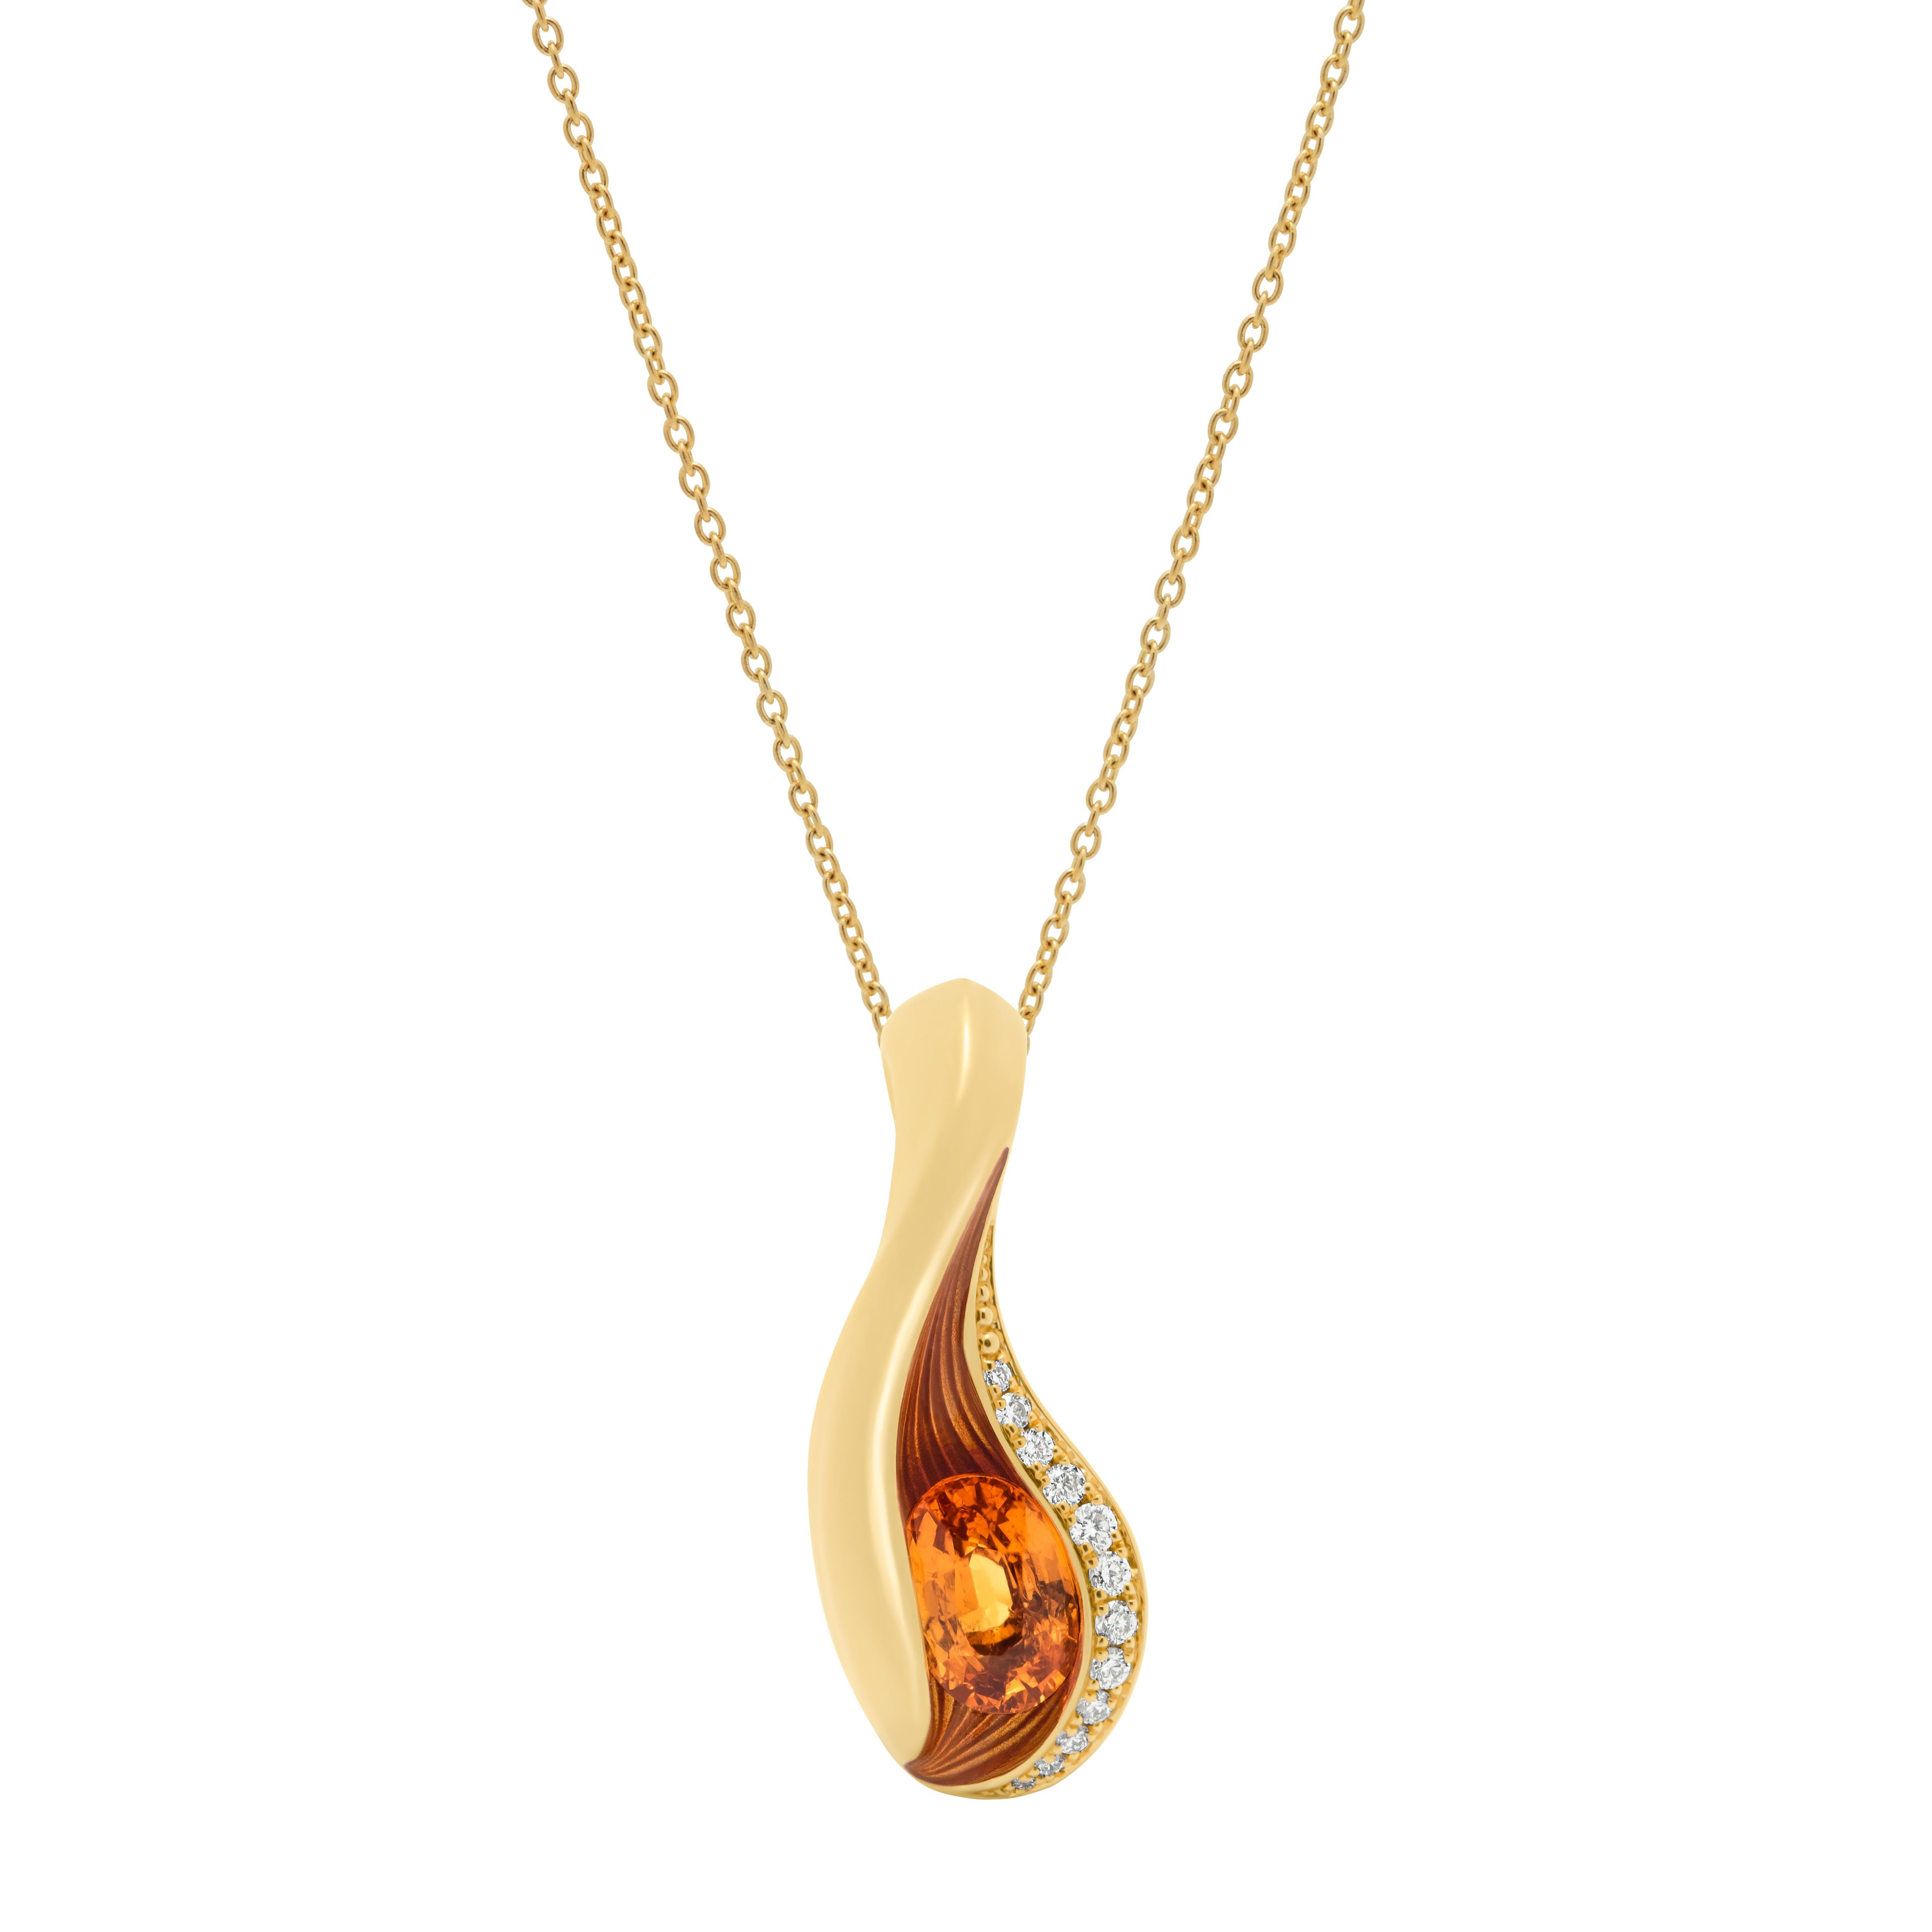 Spessartine Diamonds Enamel 18 Karat Yellow Gold Melted Colors Pendant
Our new collection 